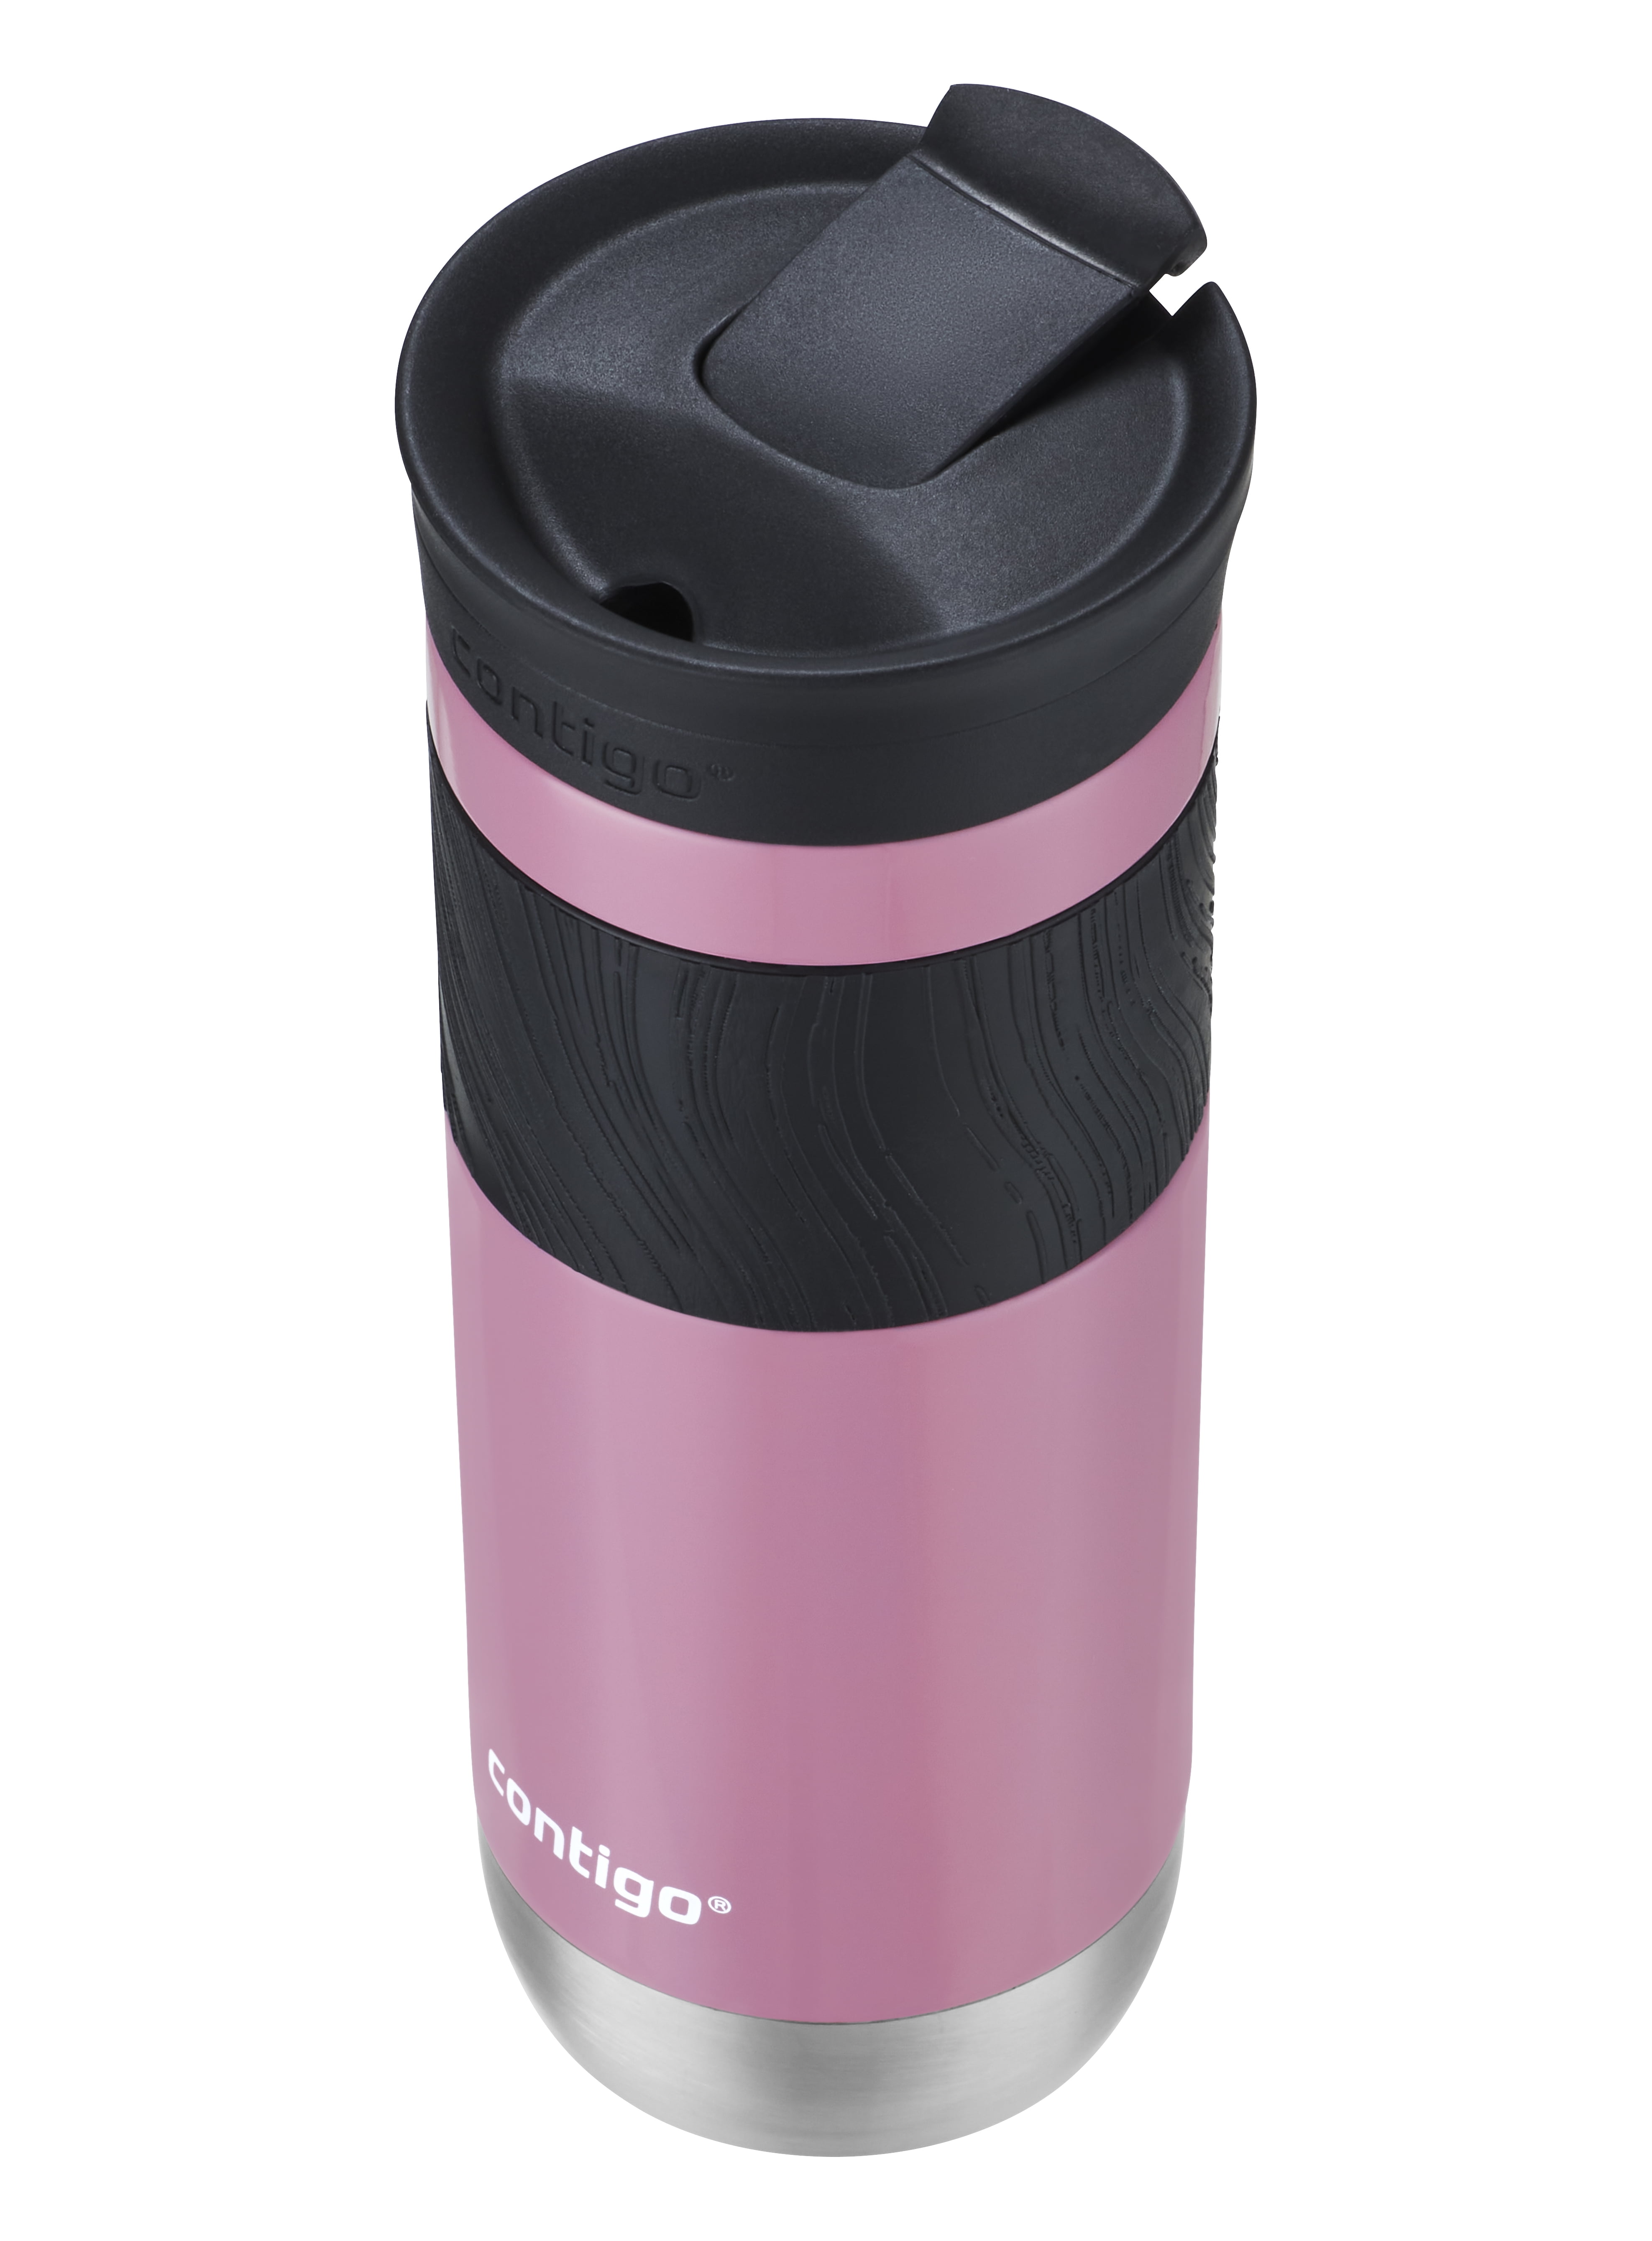 Contigo Byron 2.0 24oz Stainless Steel Travel Mug with SNAPSEAL Lid and  Grip Licorice 1 ct